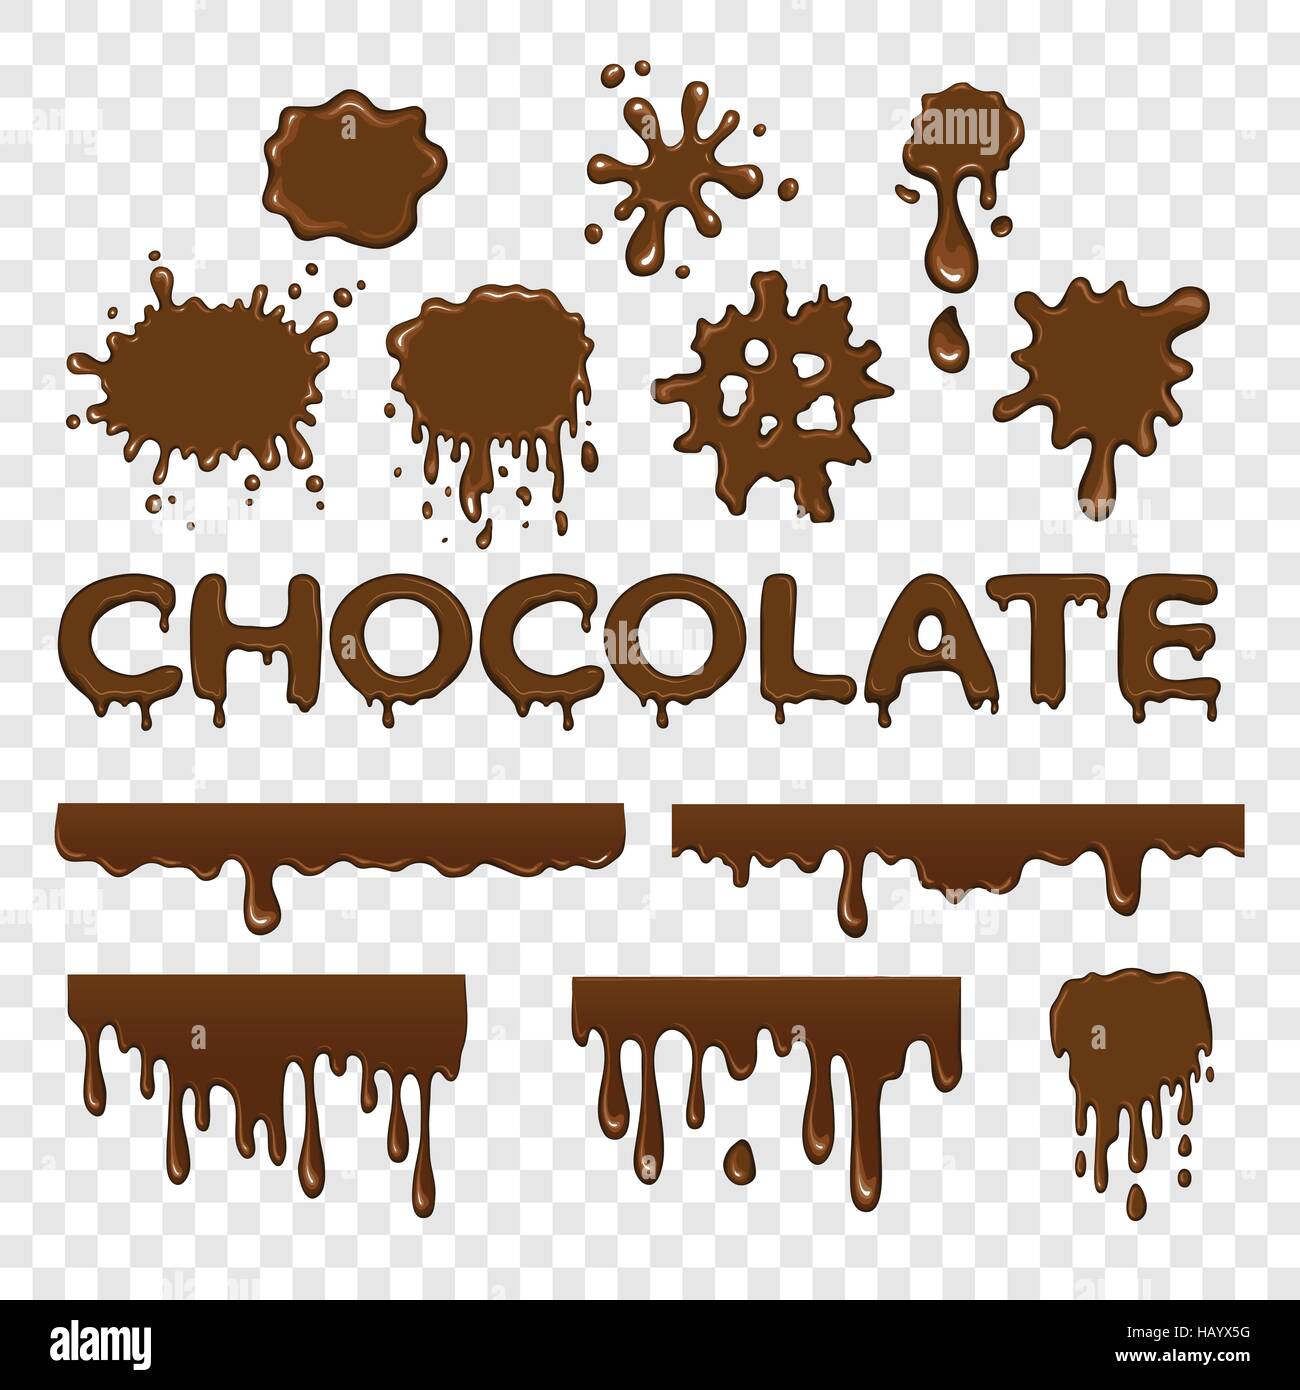 Chocolate splat collection Stock Vector